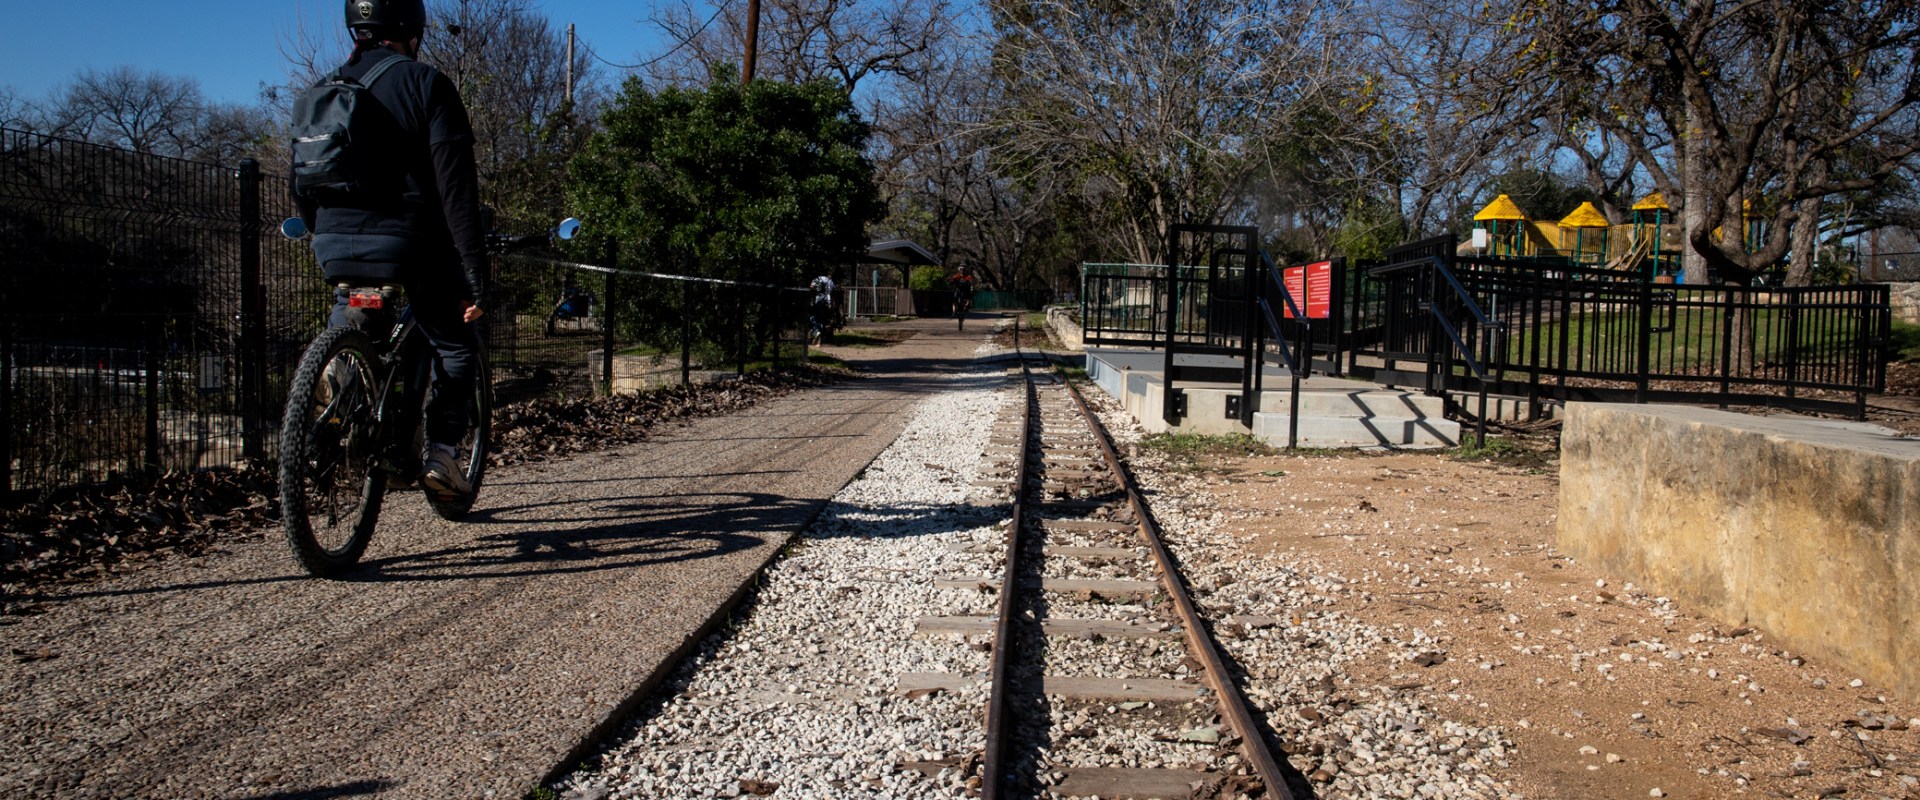 Book Your Train Ride in Austin, Texas with Wanderu